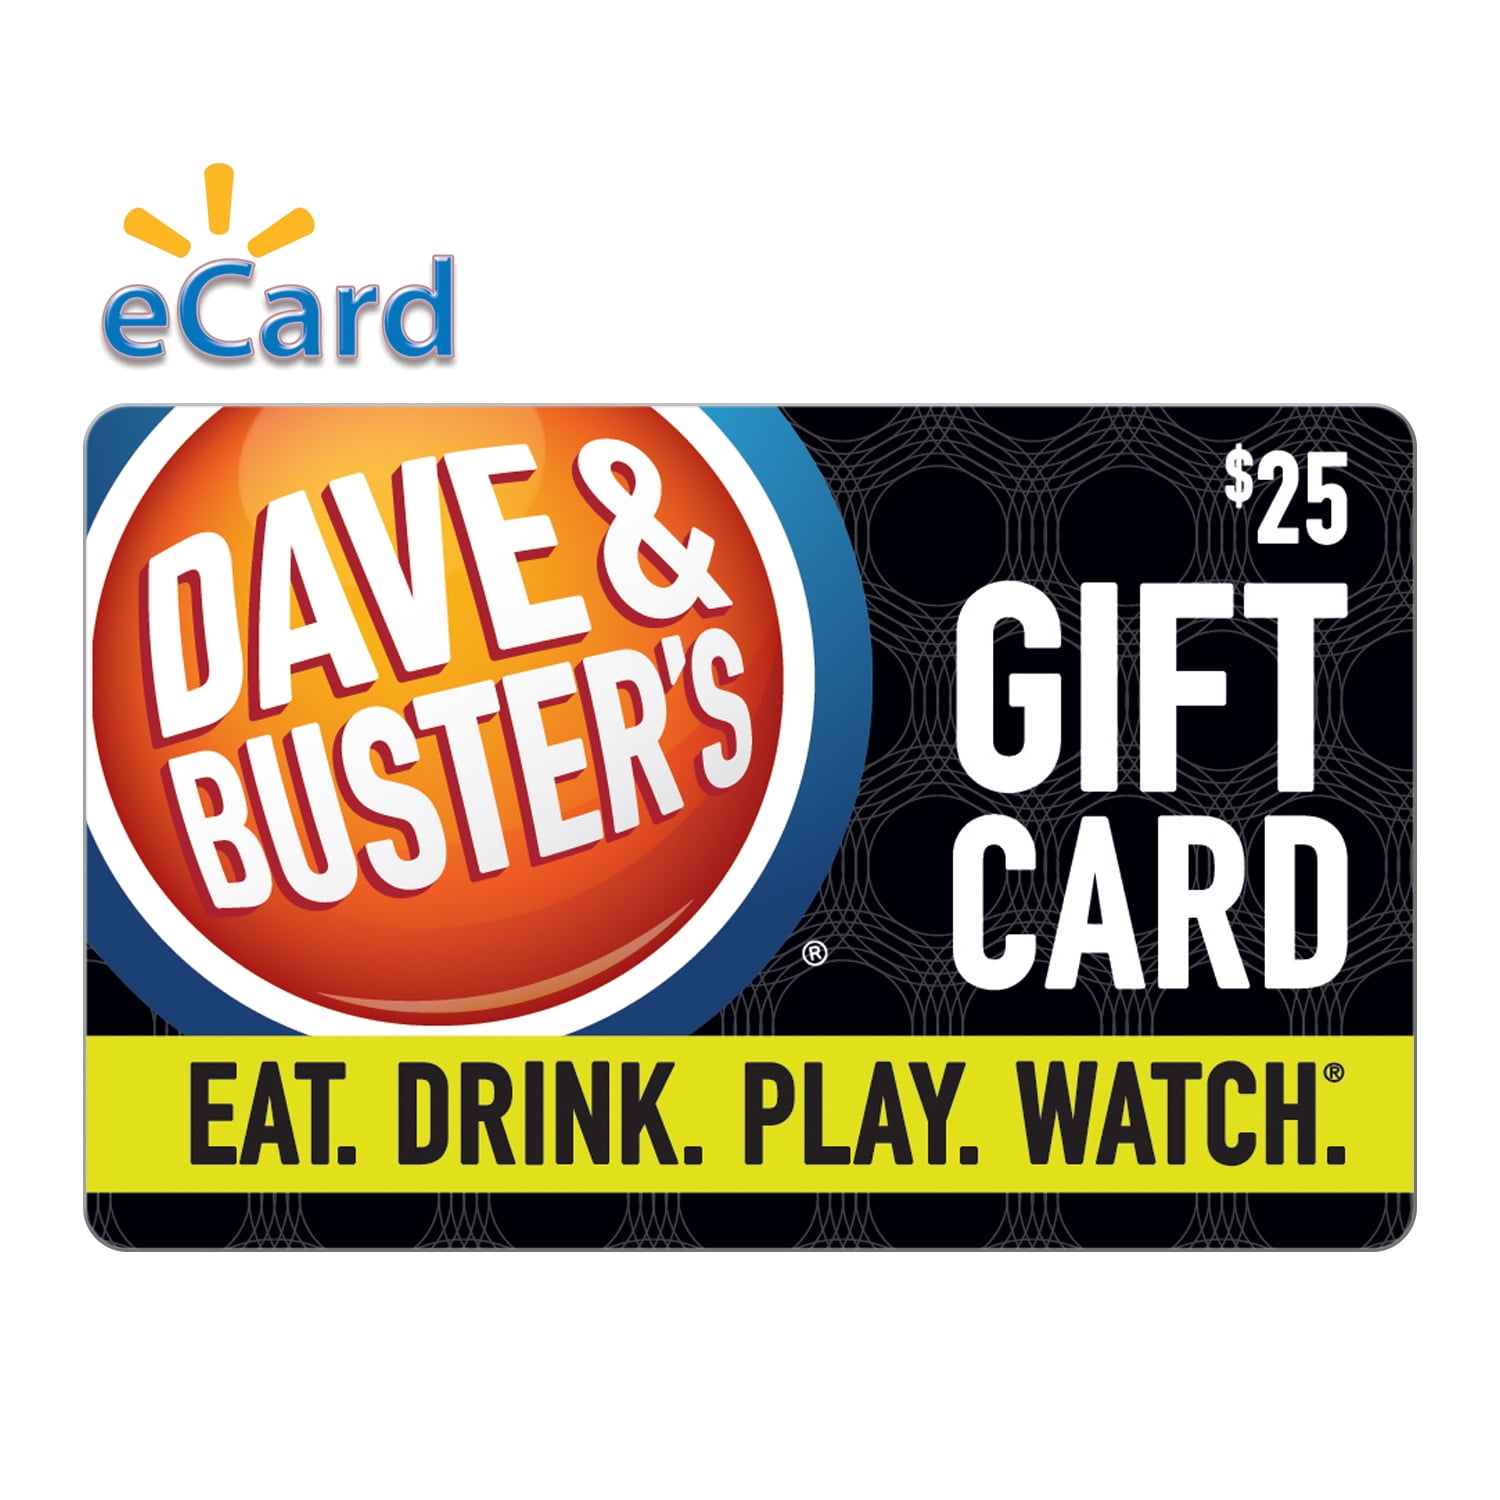 Free: Dave & Busters GOLD REWARDS CARD + $10 FREE GAME PLAY! (My cost =  Over $200 !!) - Other -  Auctions for Free Stuff